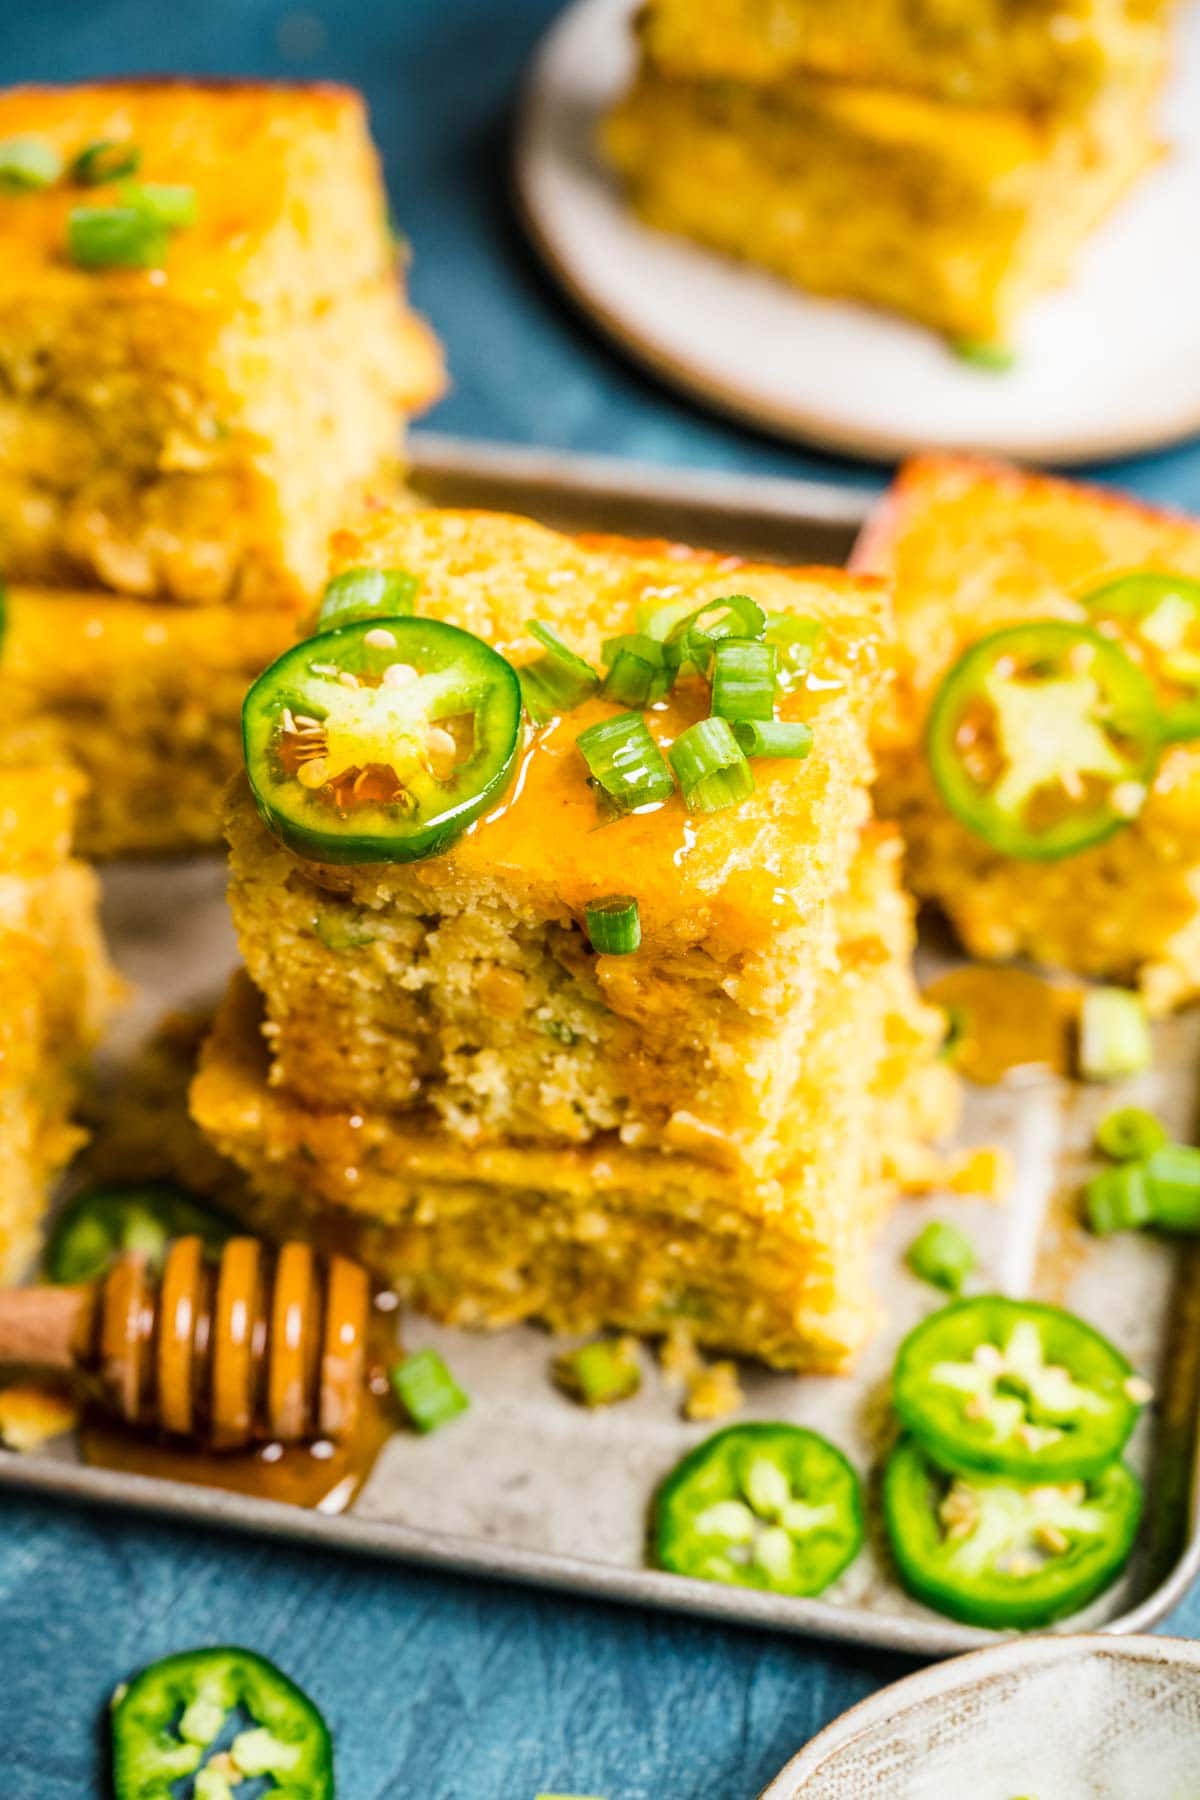 Spicy Mexican Cornbread squares stacked on serving plate with jalapeno slices and honey drizzled